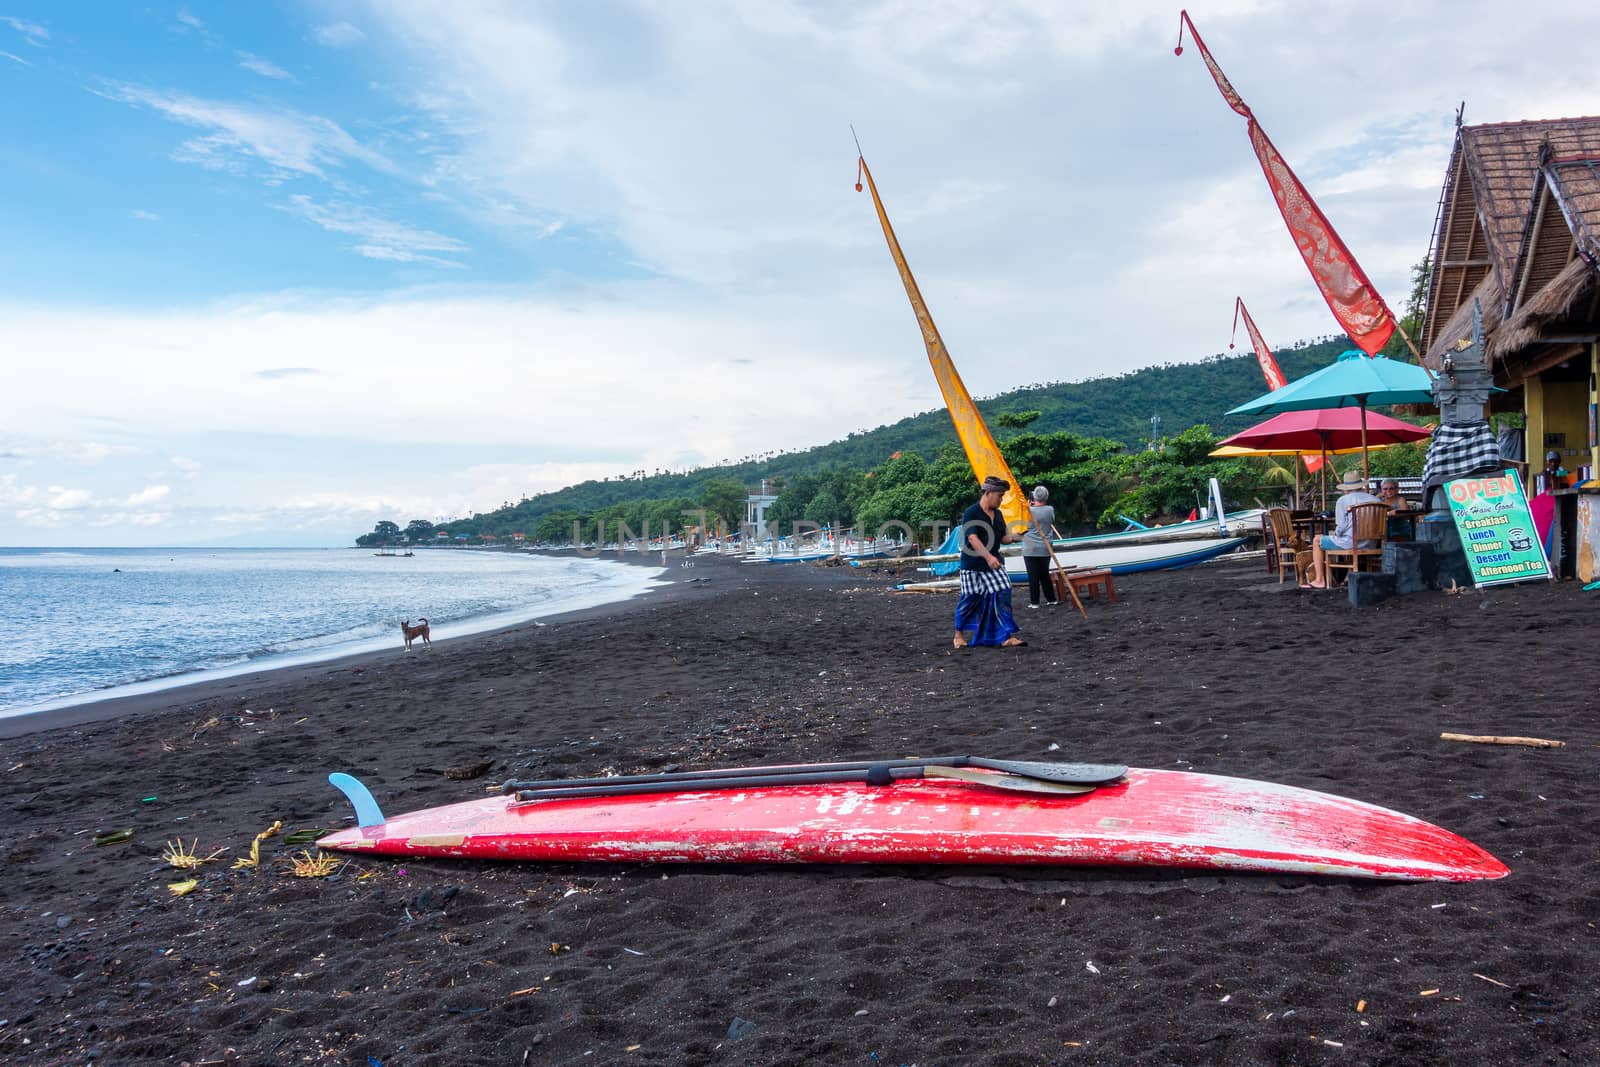 Red paddle board on Amed Beach in Bali by dutourdumonde